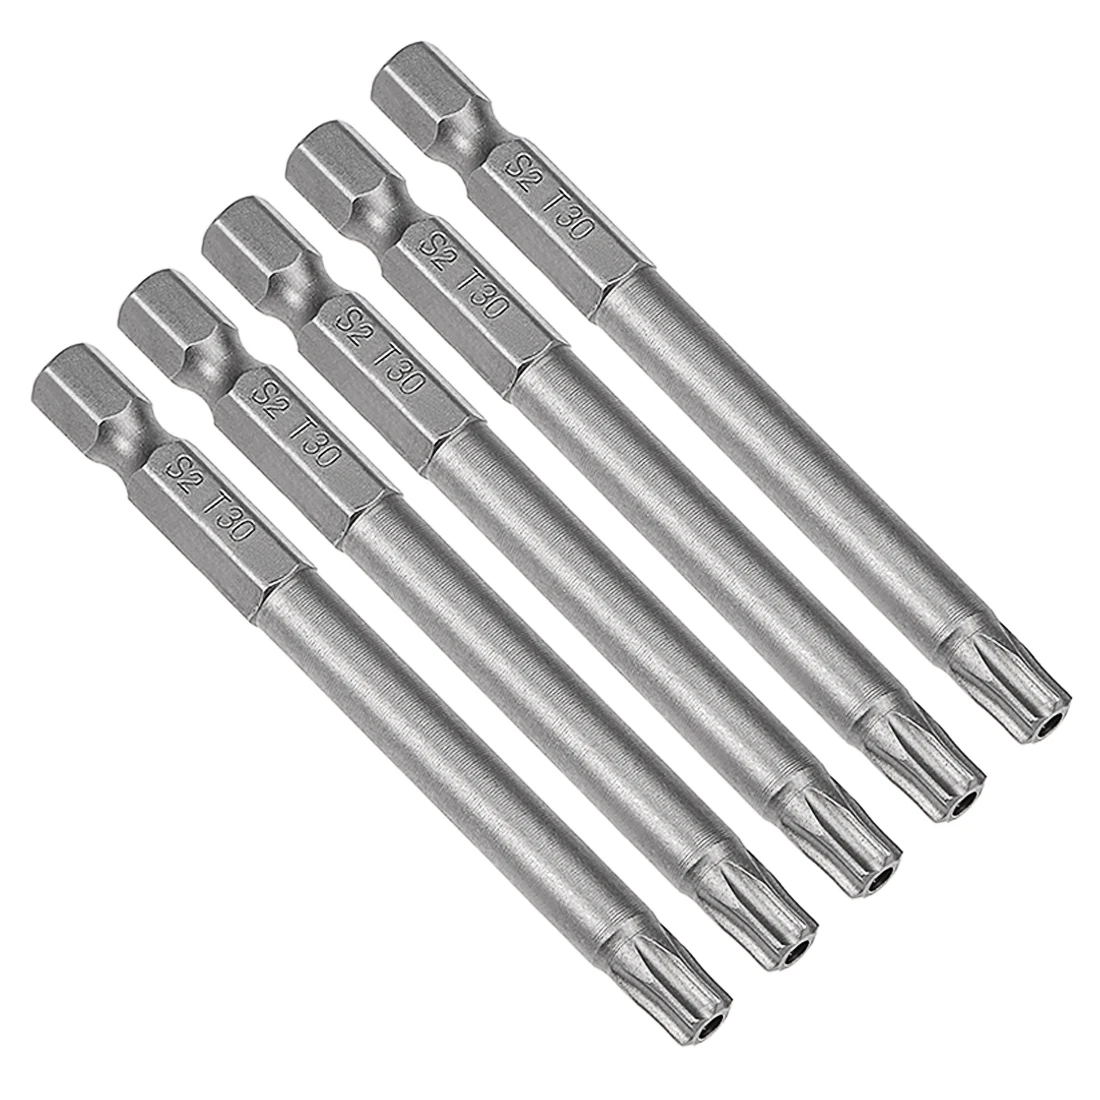 uxcell 5 Pcs 1/4" Hex Shank T30 Magnetic Security Torx Screwdriver Bits 75mm Length